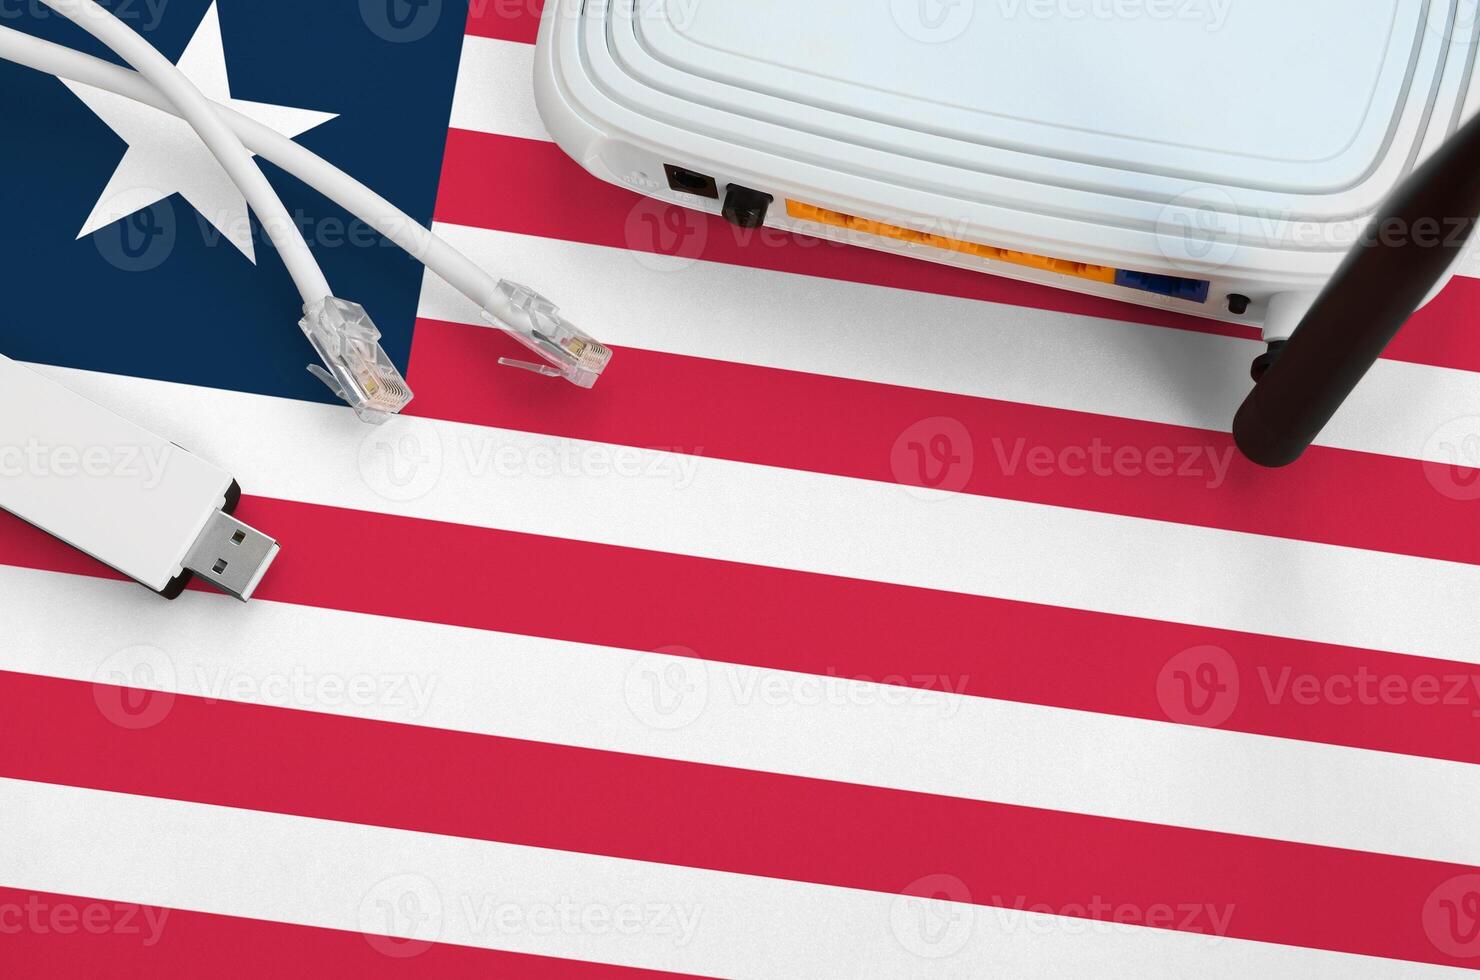 Liberia flag depicted on table with internet rj45 cable, wireless usb wifi adapter and router. Internet connection concept photo